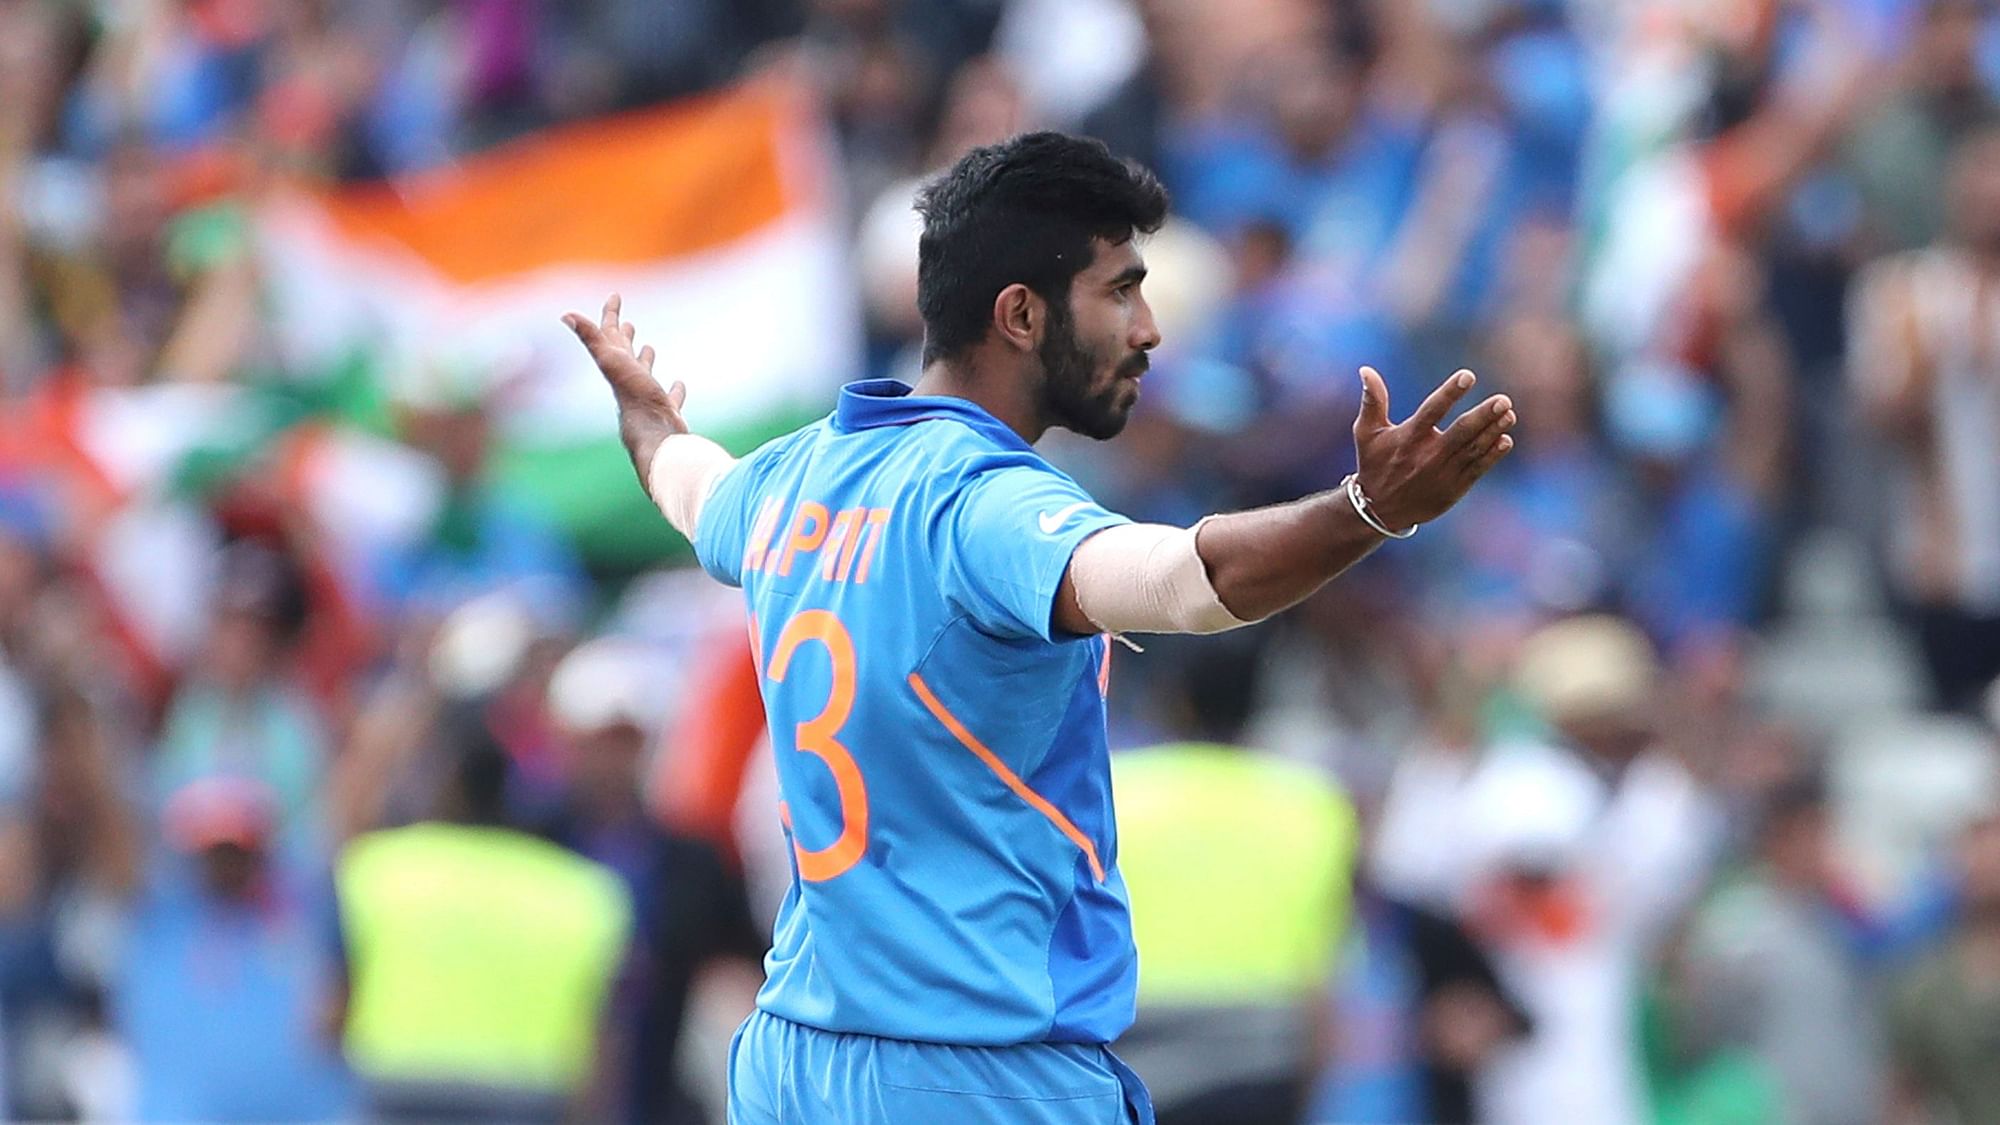 Bumrah became the second fastest Indian to reach 100 wickets.